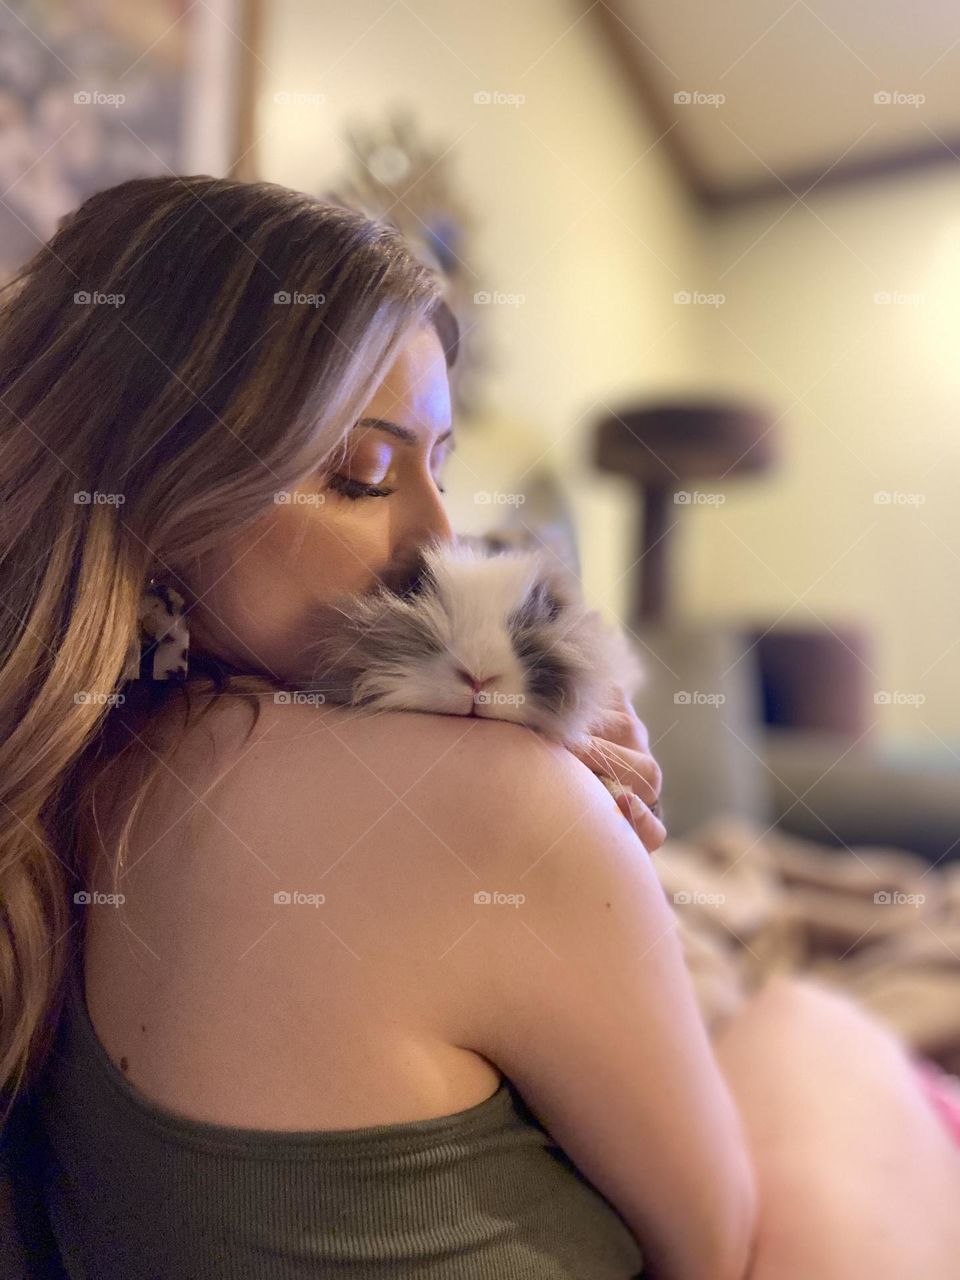 Sweet late night cuddles with my handsome lion head rabbit, Frank! 